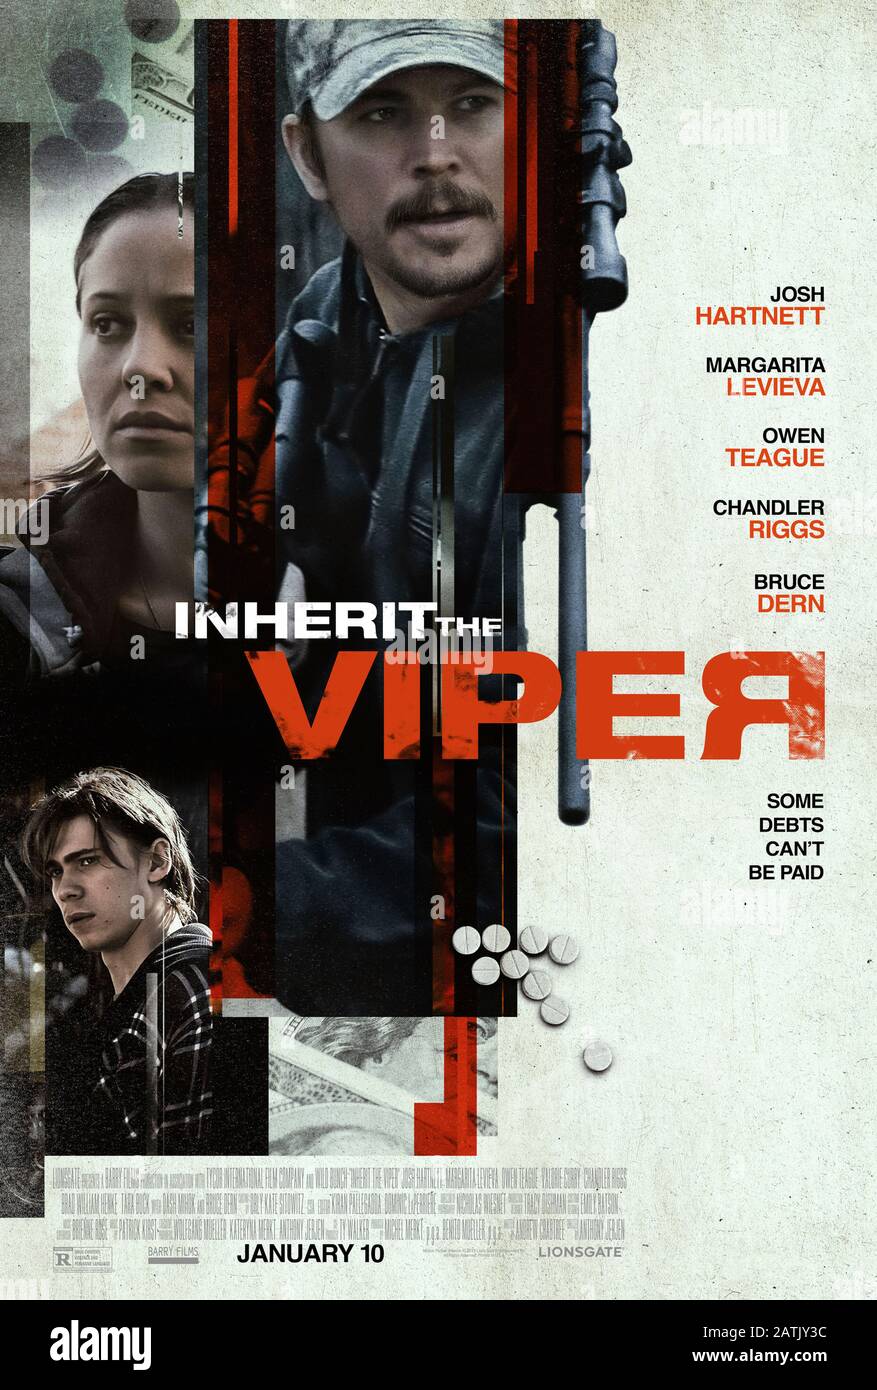 Inherit the Viper (2019) directed by Anthony Jerjen and starring Josh Hartnett, Margarita Levieva and Bruce Dern. Gritty thriller about 3 opiod dealers in Appalachia caught in a downward spiral of violence. Stock Photo